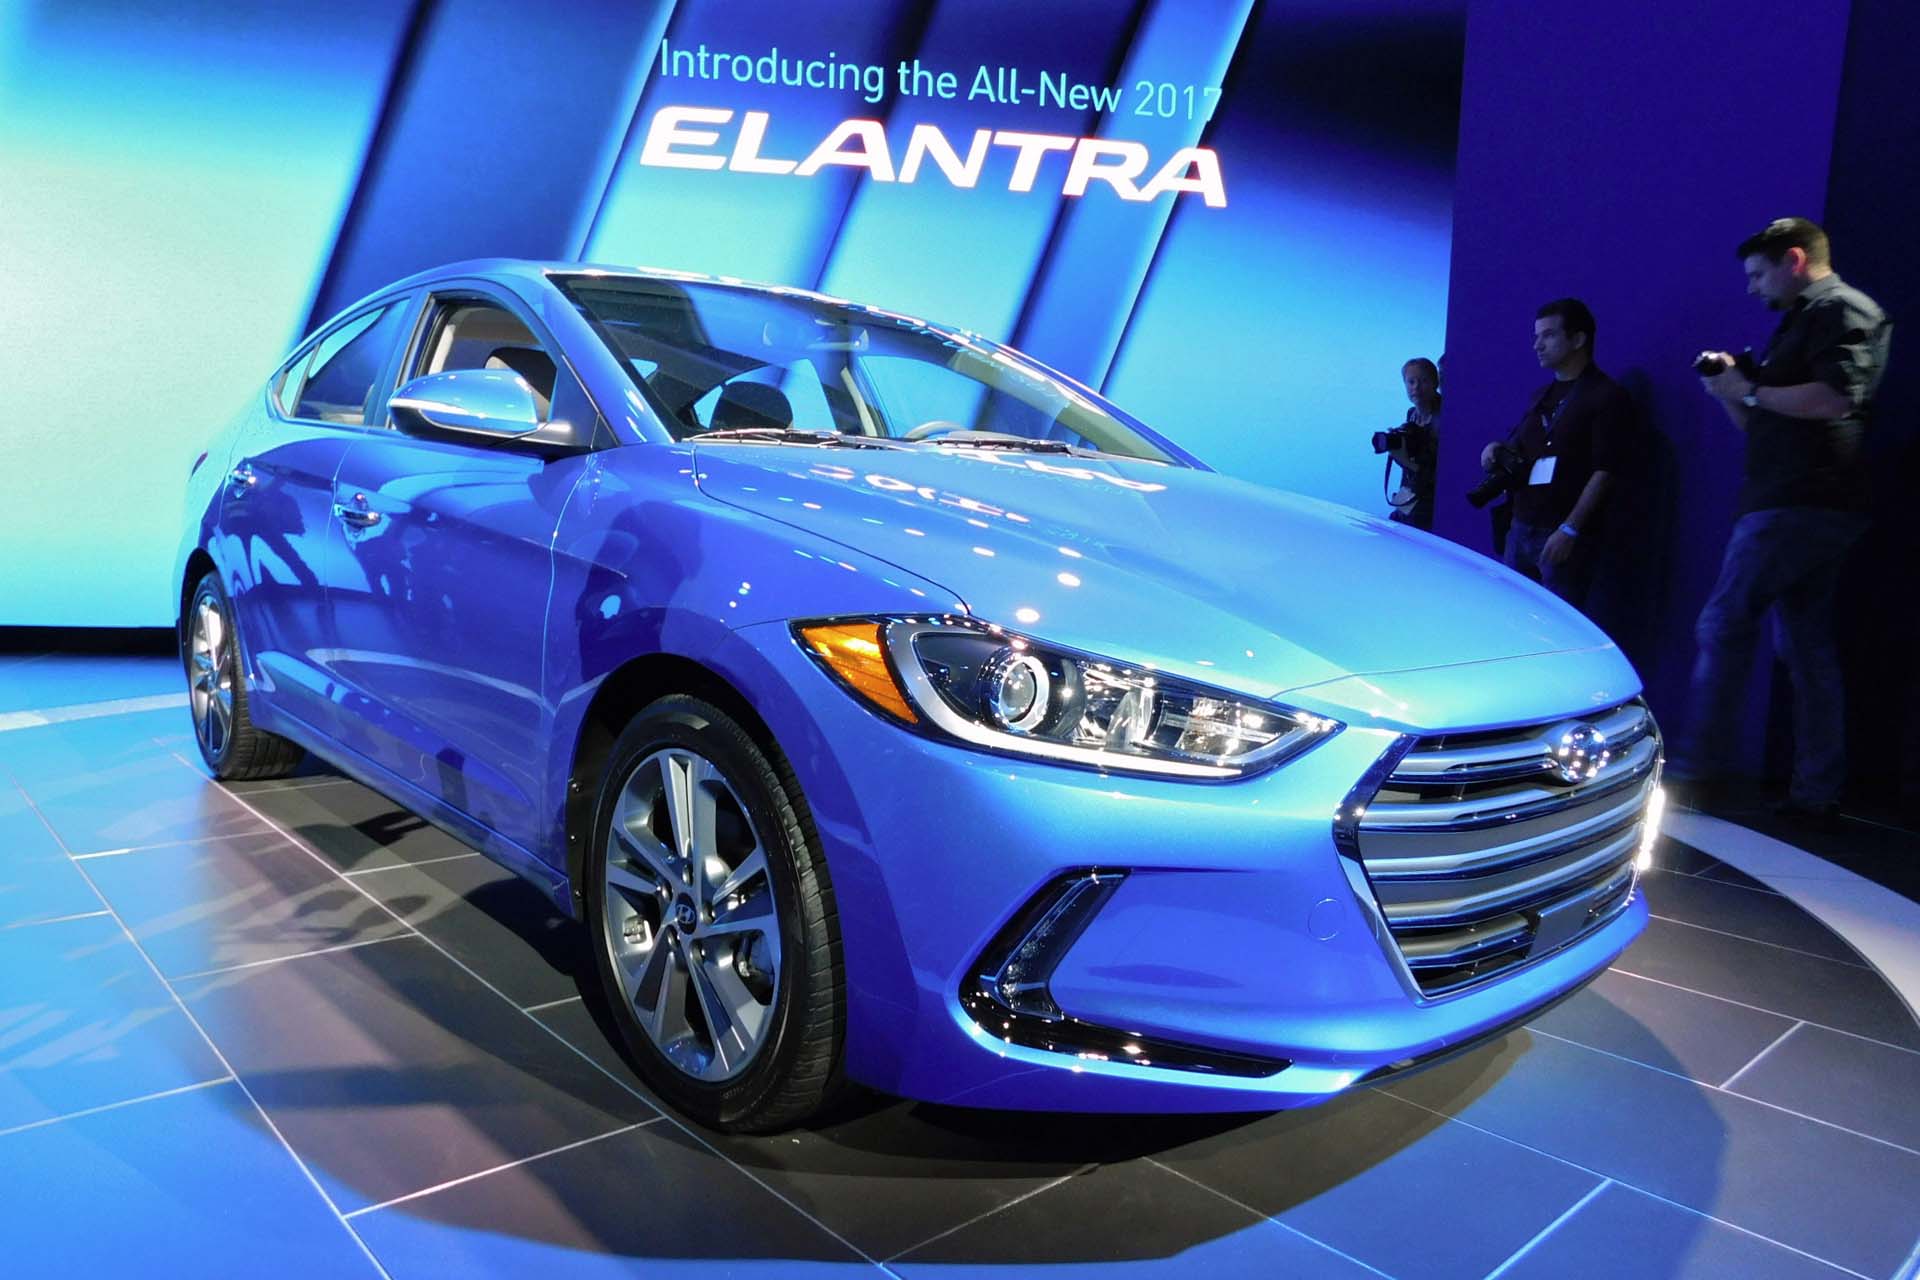 The big news for Hyundai at the 2015 Los Angeles Auto Show was the debut of the redesigned, sixth-generation 2017 Hyundai Elantra. The latest version of Hyundai’s best-selling model gains 20 mm of length and 5 mm of height over the current model and has a distinct family resemblance to the Sonata.